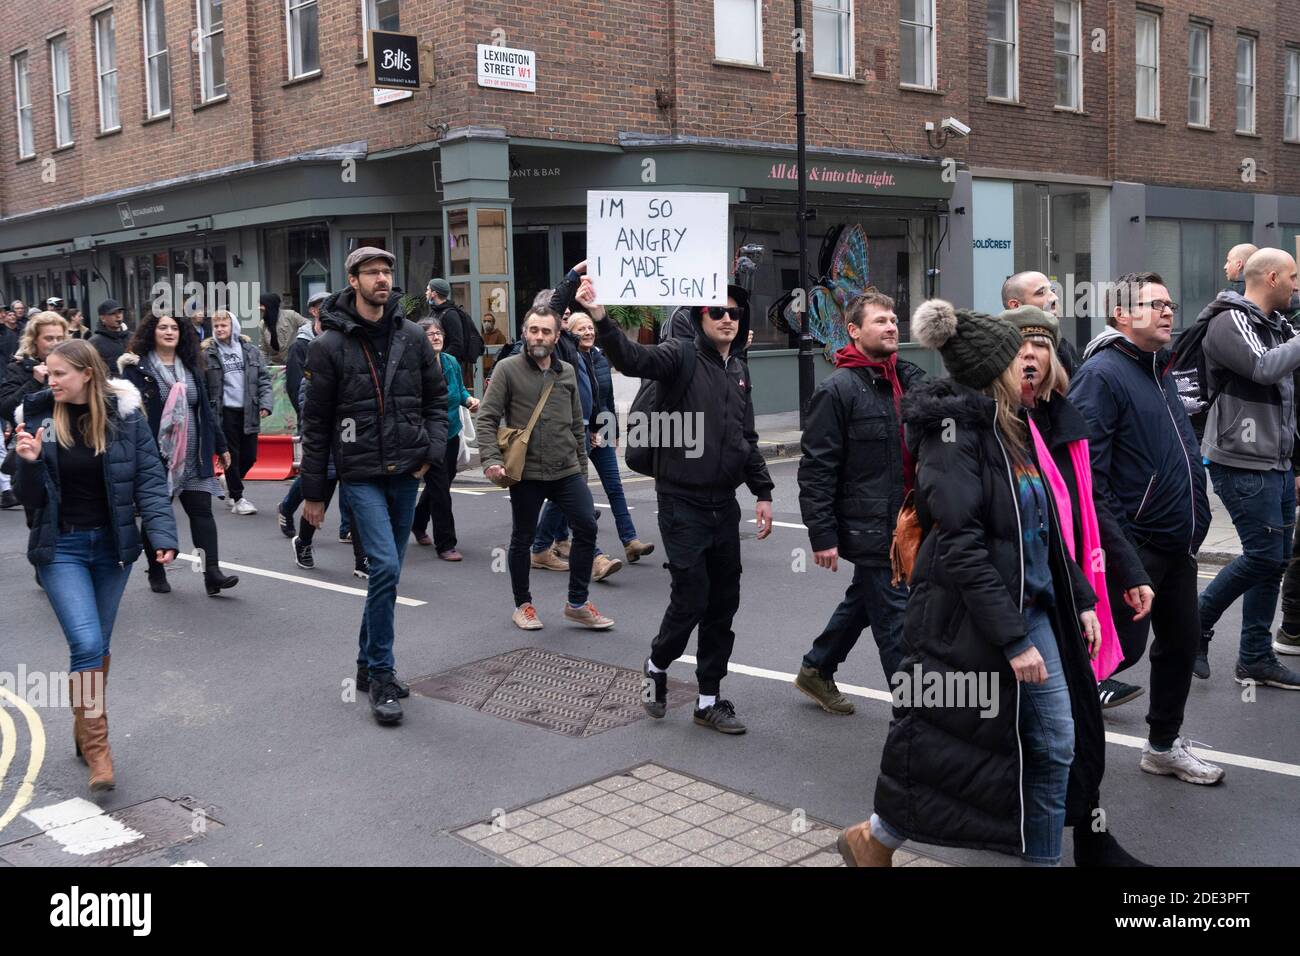 London, Britain. 28th Nov, 2020. Protesters take part in an anti-lockdown protest in London, Britain, on Nov. 28, 2020. More than 60 people were arrested as anti-lockdown protesters clashed with police in central London on Saturday, local media reported. Credit: Ray Tang/Xinhua/Alamy Live News Stock Photo